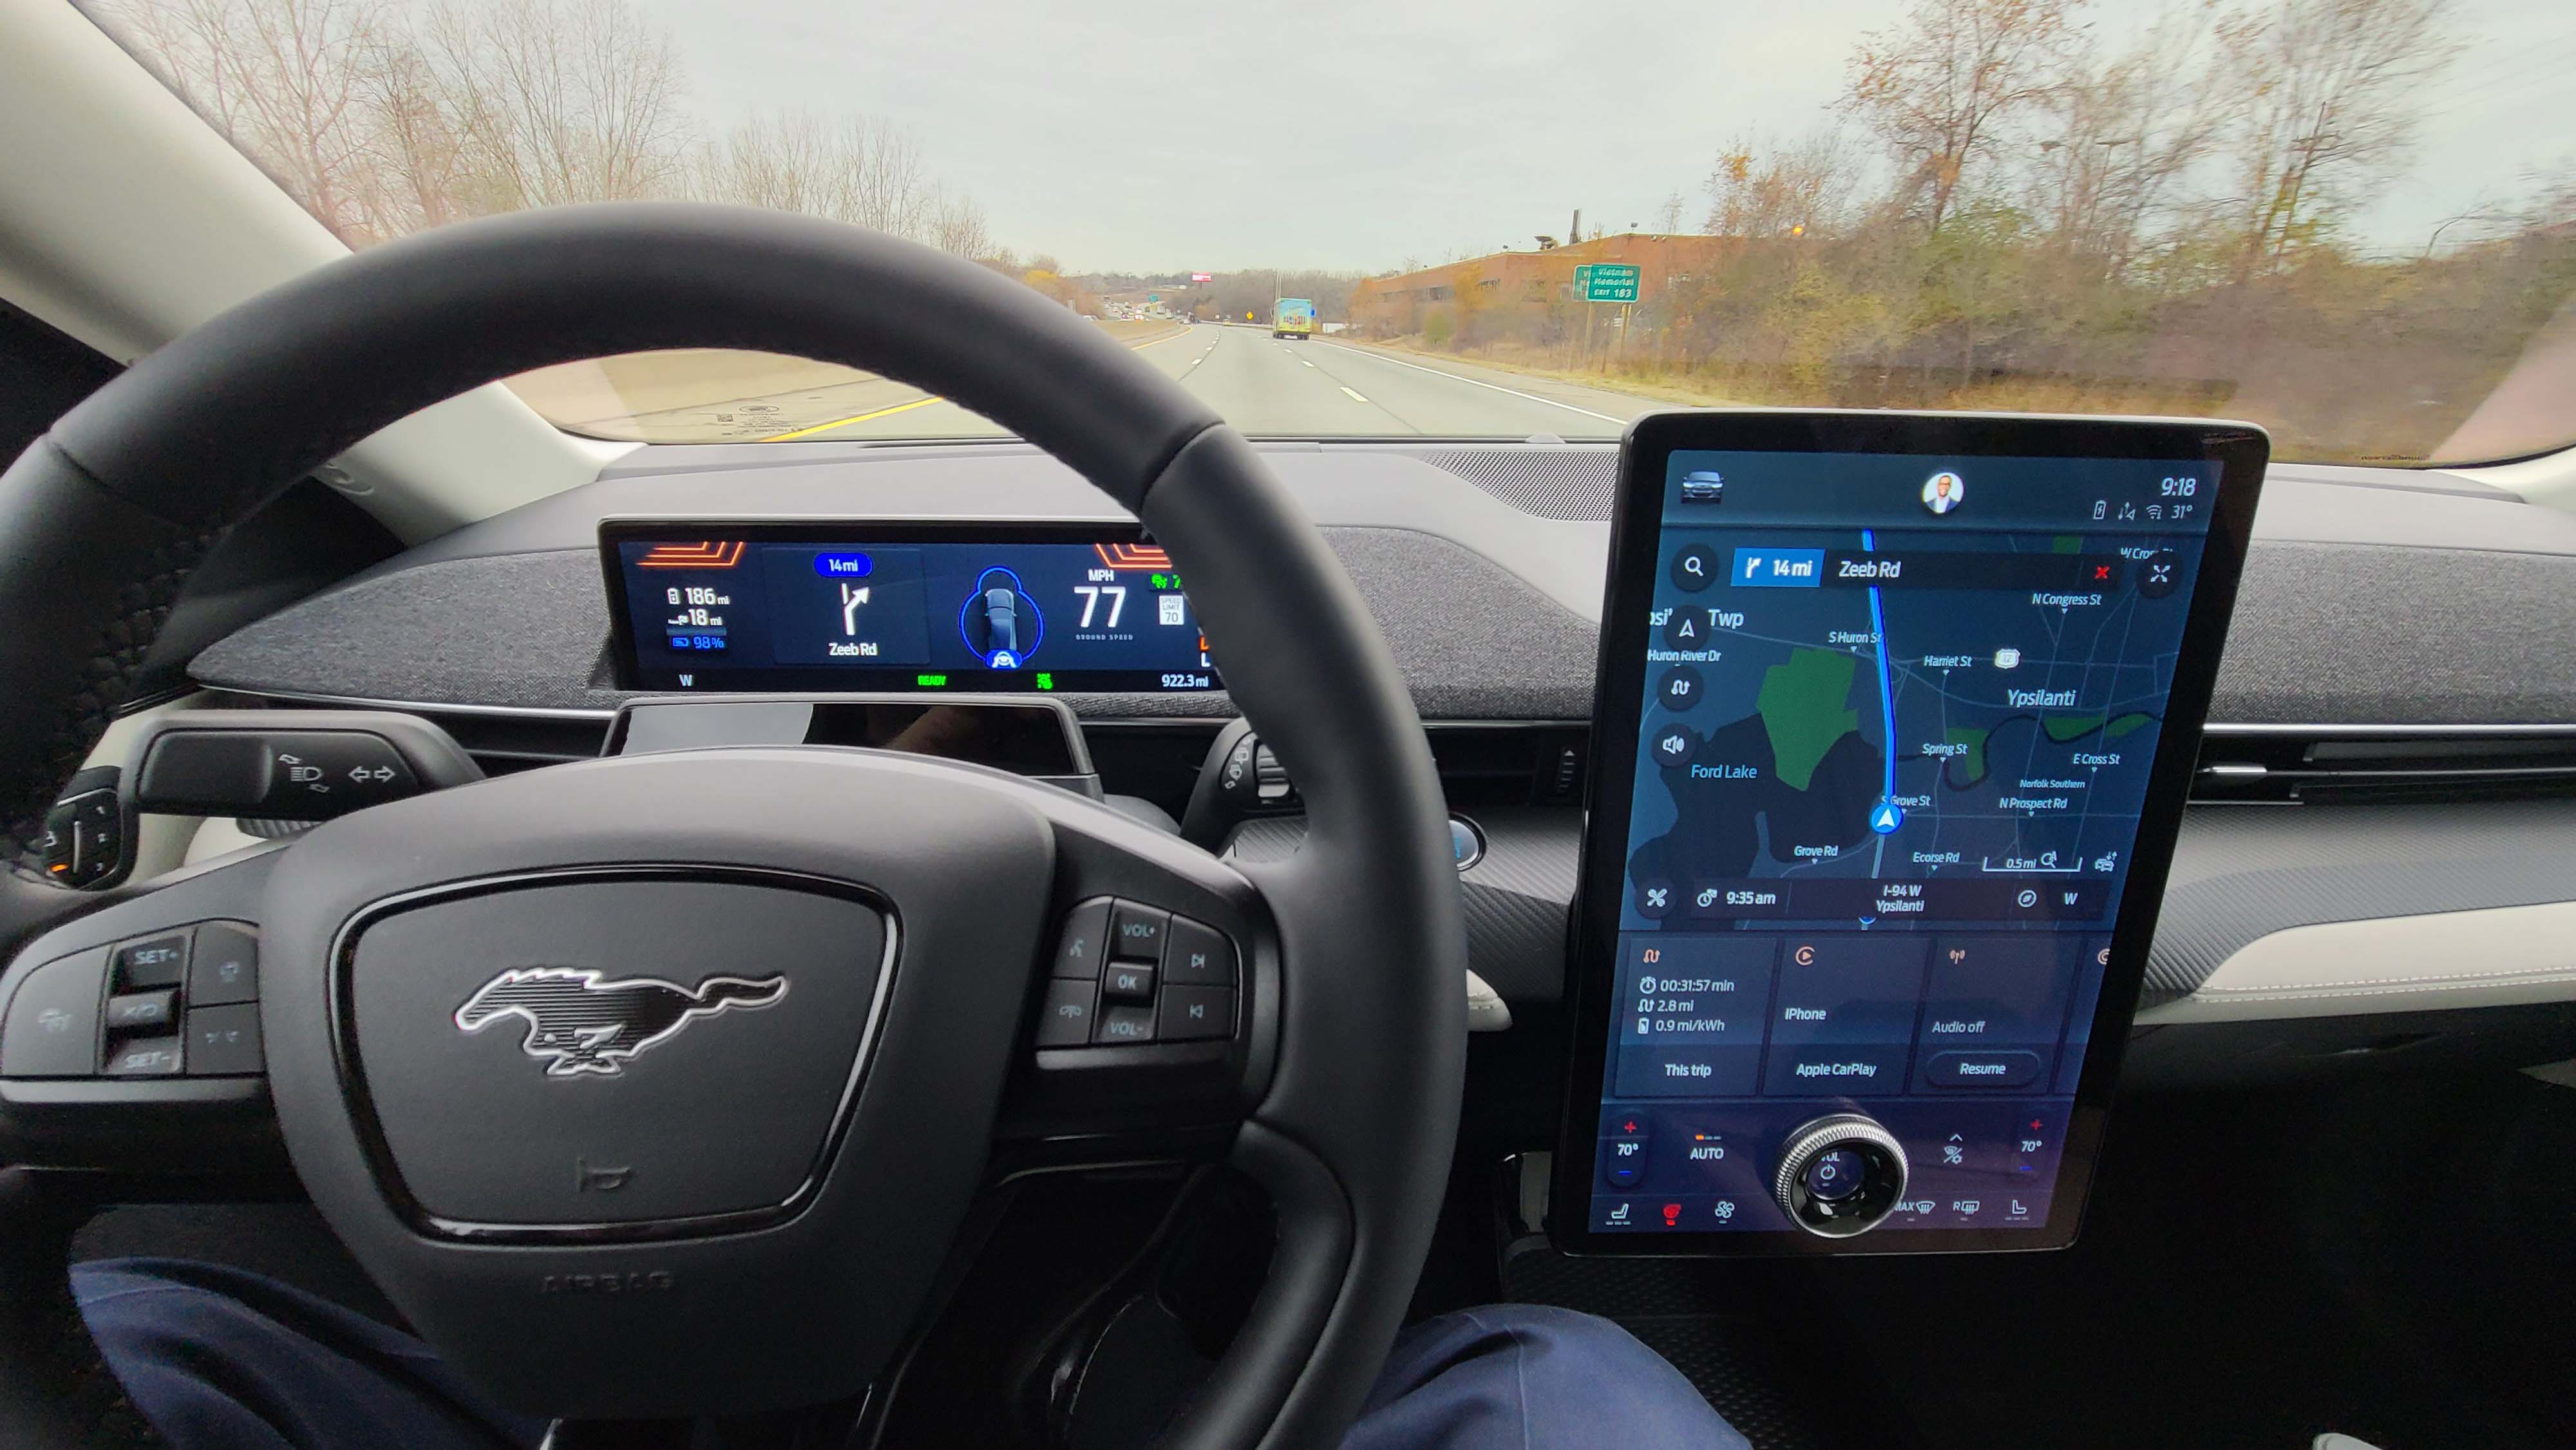 Unlike the Tesla Model Y, the 2021 Ford Mustang Mach-E maintains a small instrument display behind the steering in addition to its big, 15.5-inch console screen.